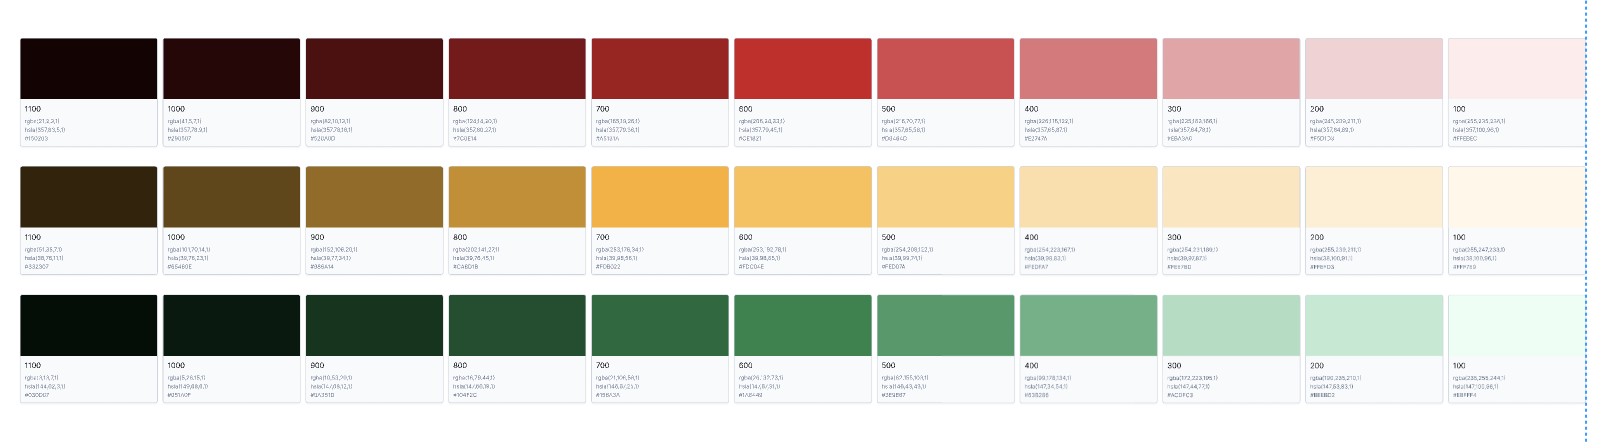 These colors communicate system status to the user using clear messaging and comply with most user’s basic understanding of what certain colors represent.